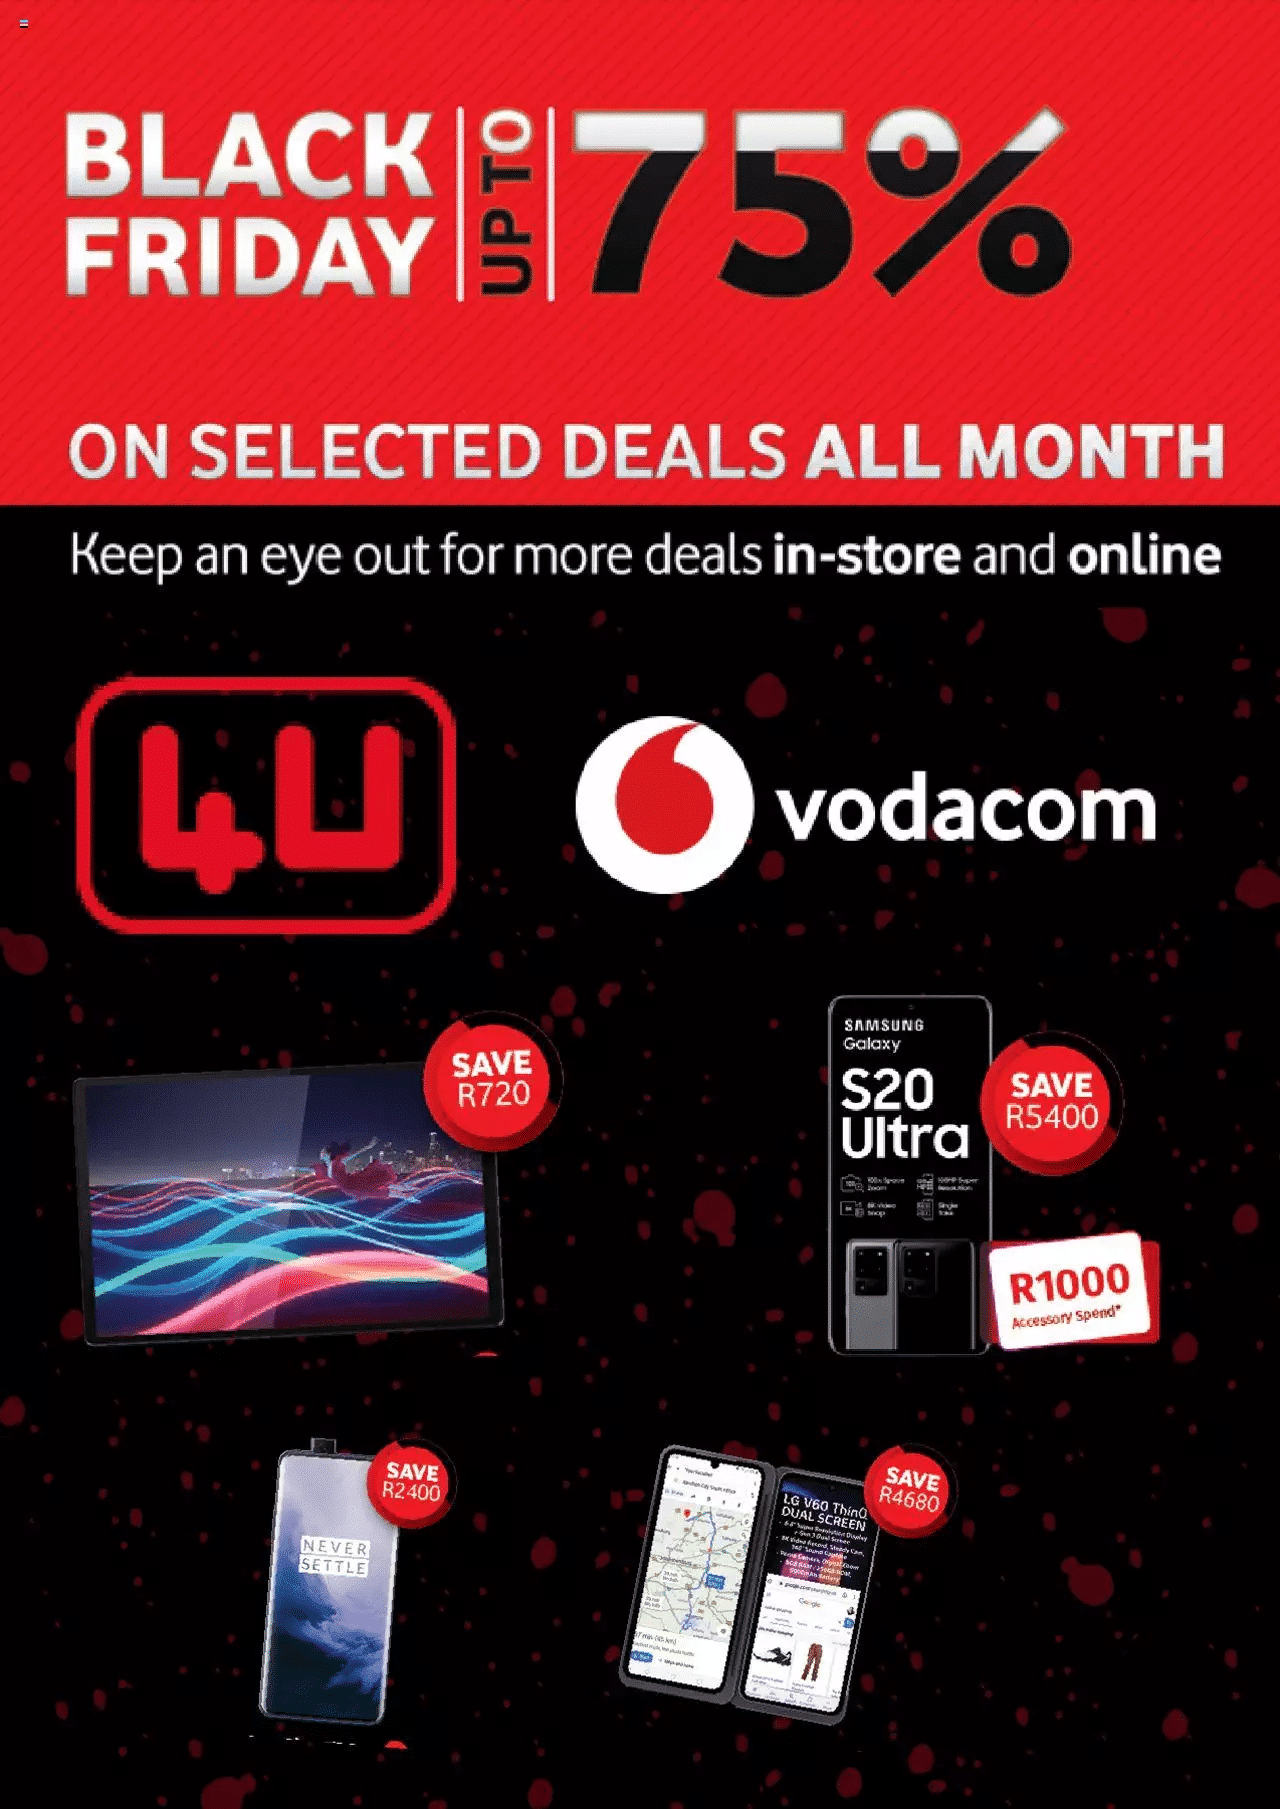 Vodacom Black Friday Deals & Specials 2021 - Is Black Friday Deals Available In India